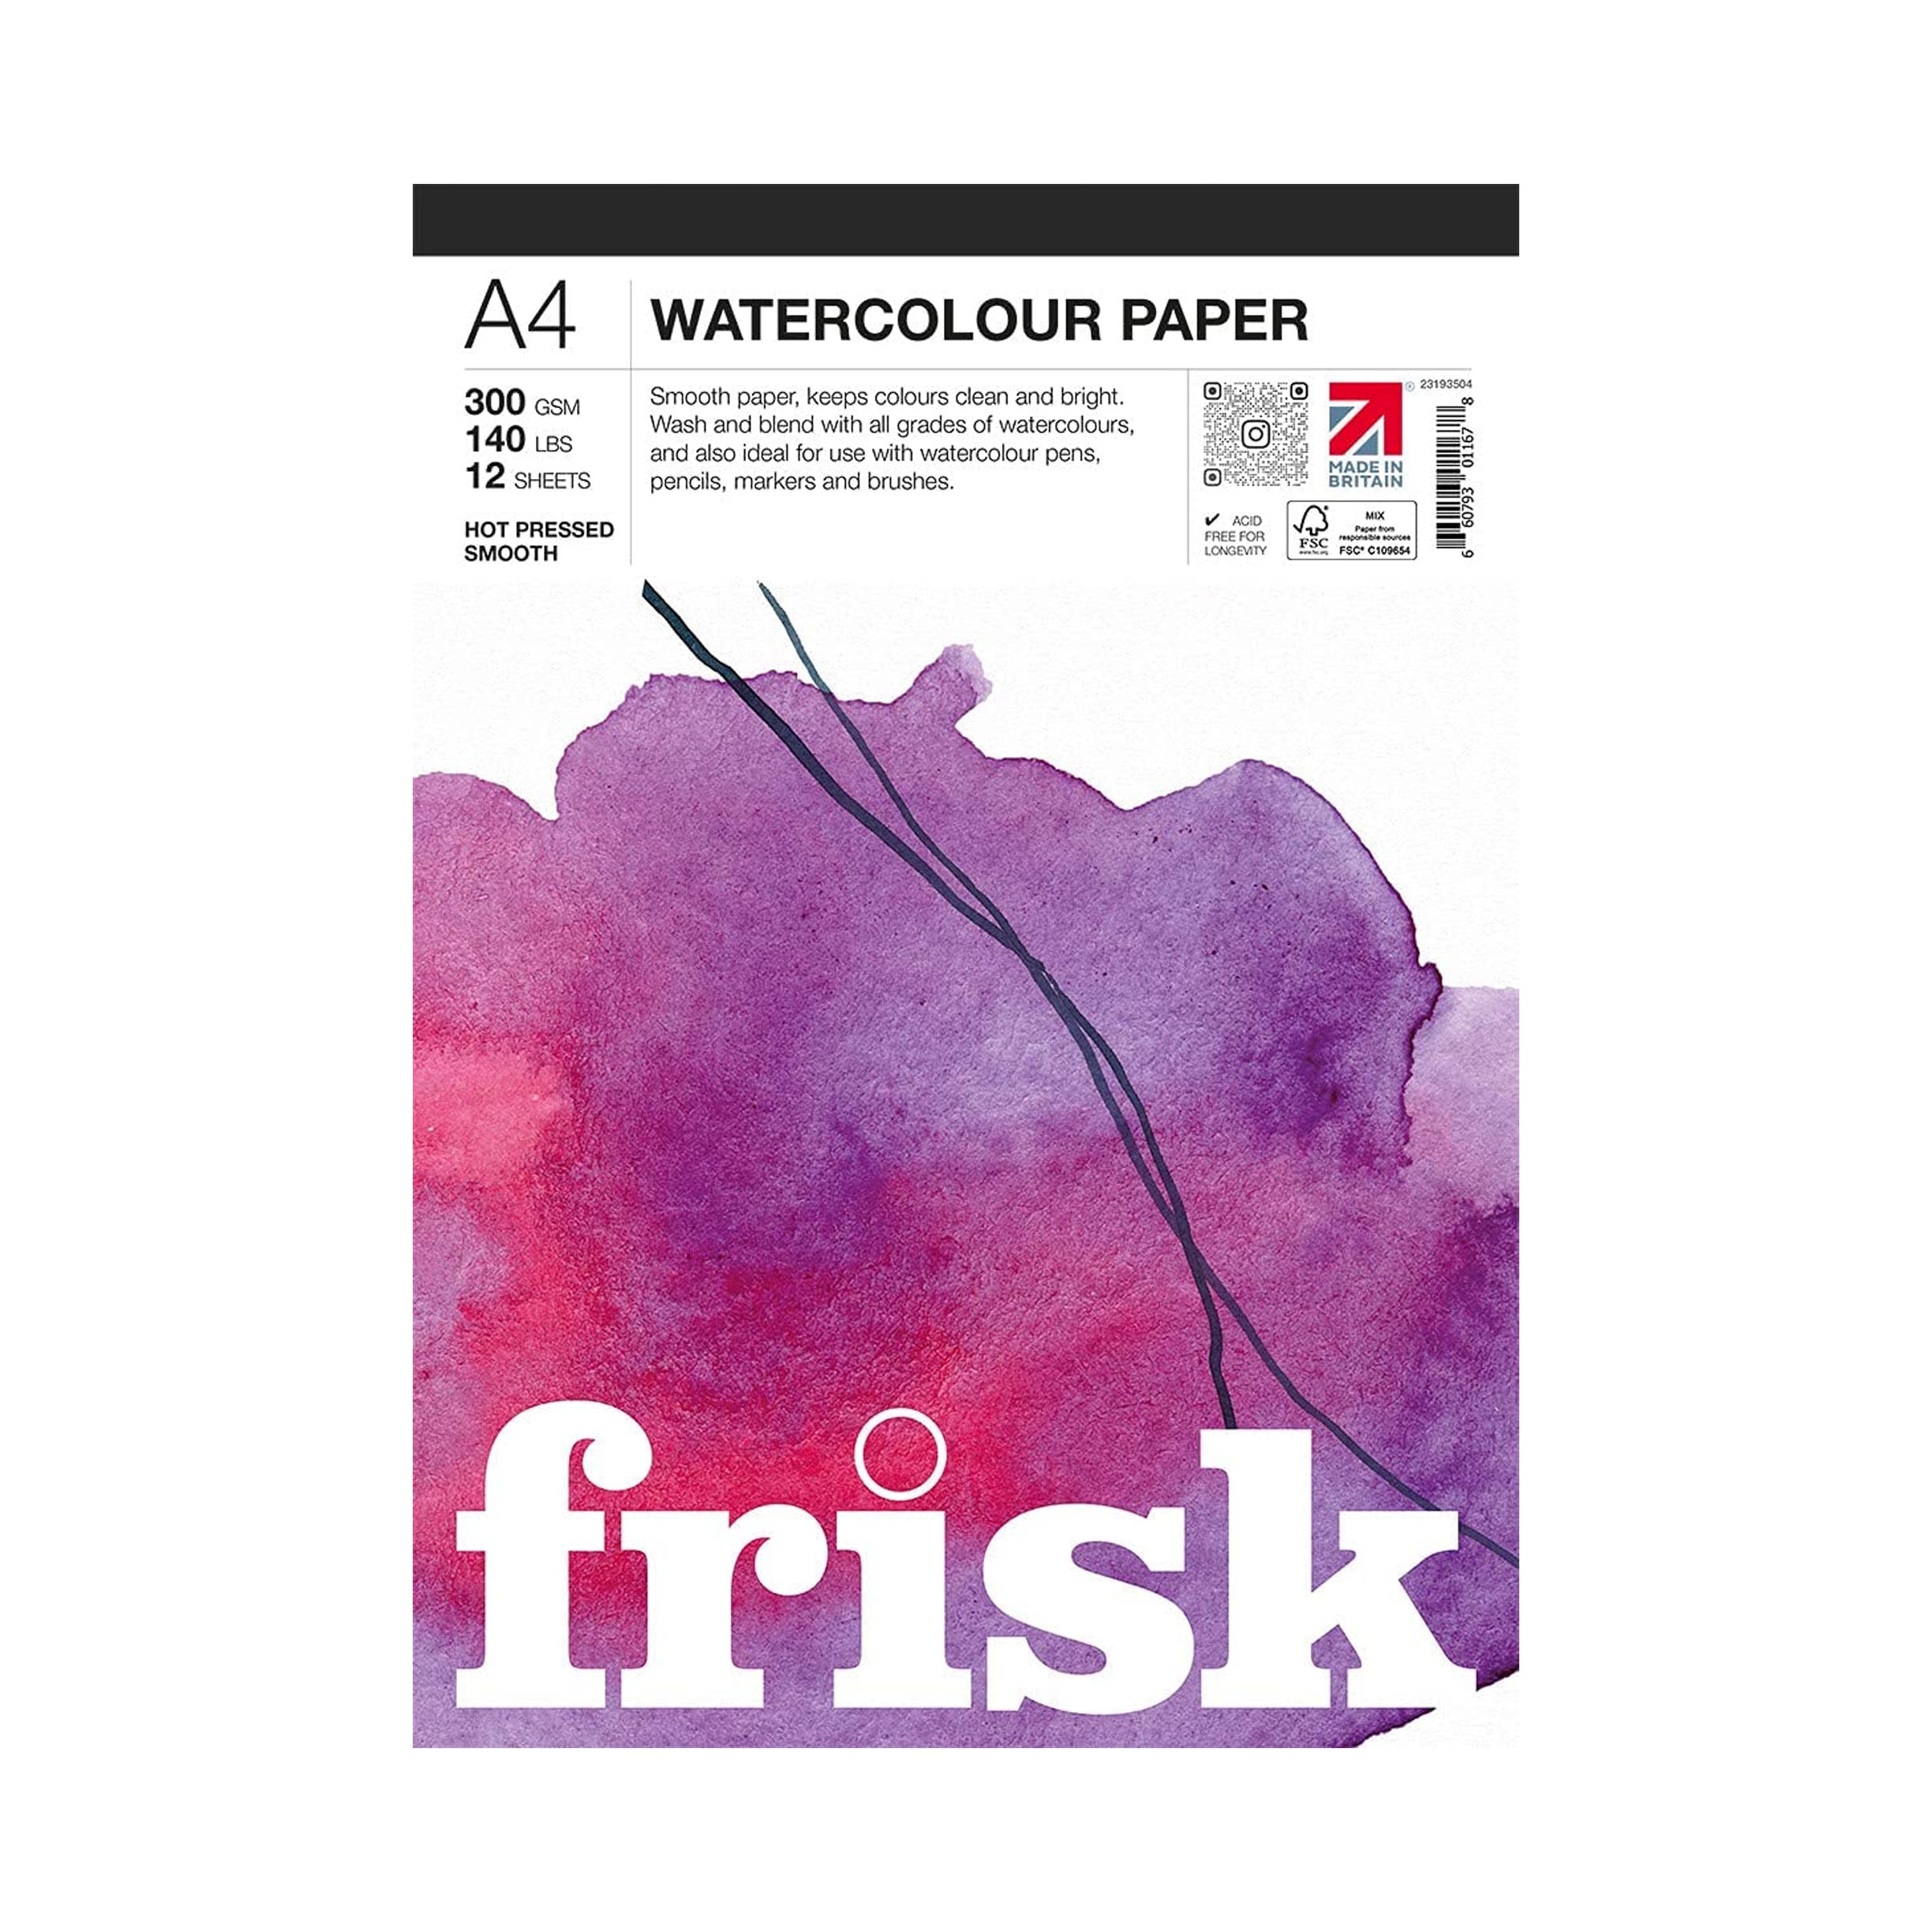 What is Watercolor Paper Made of? 